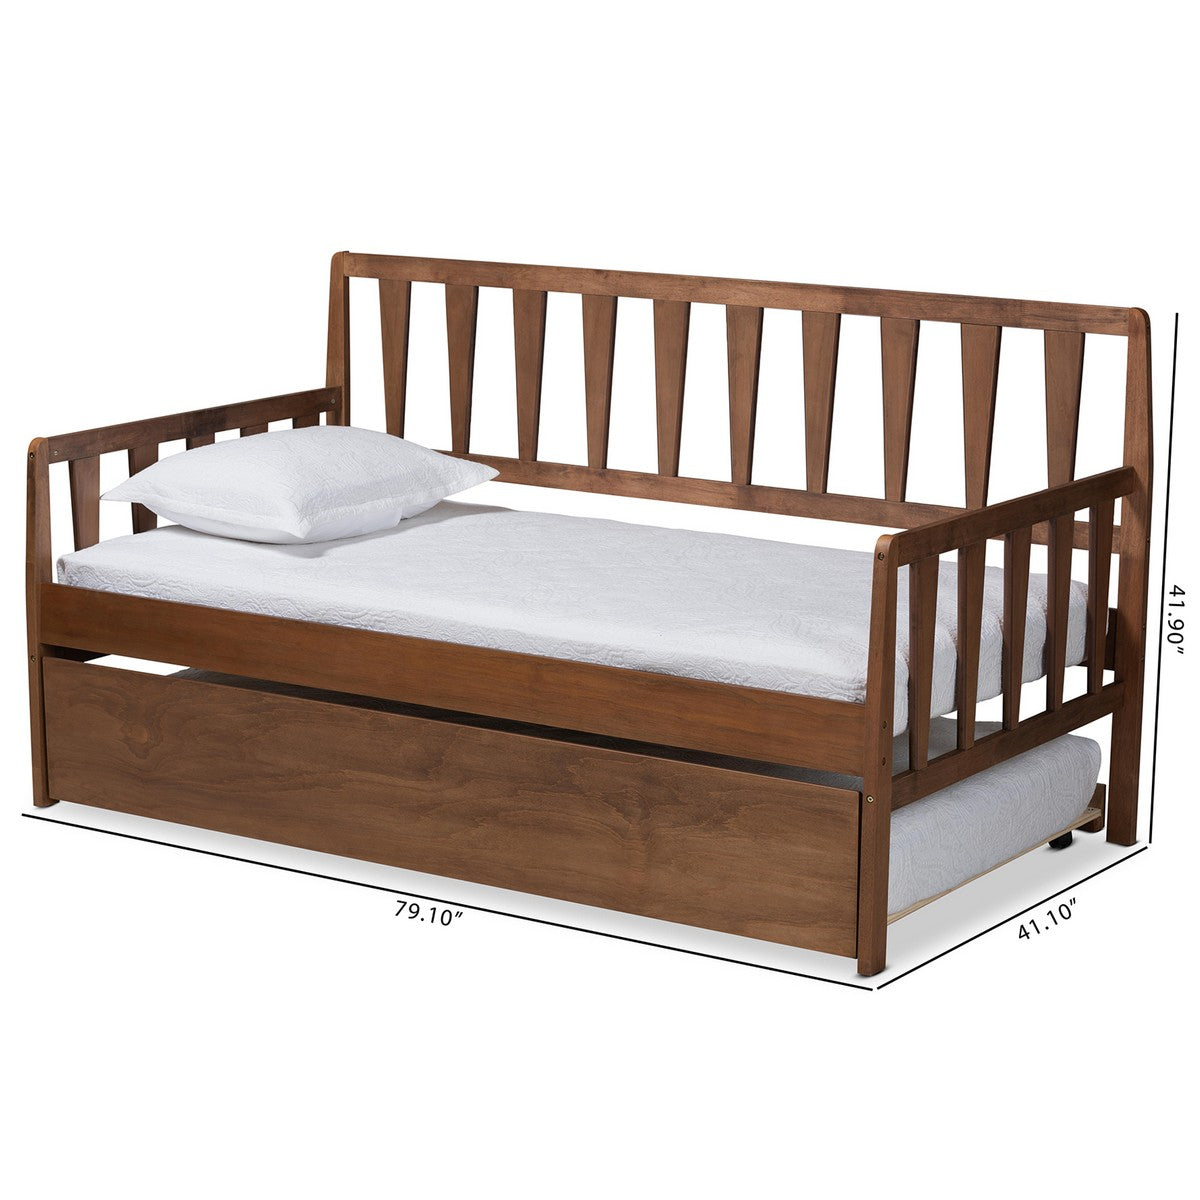 Baxton Studio Midori Modern and Contemporary Transitional Walnut Brown Finished Wood Twin Size Daybed with Roll-Out Trundle Bed